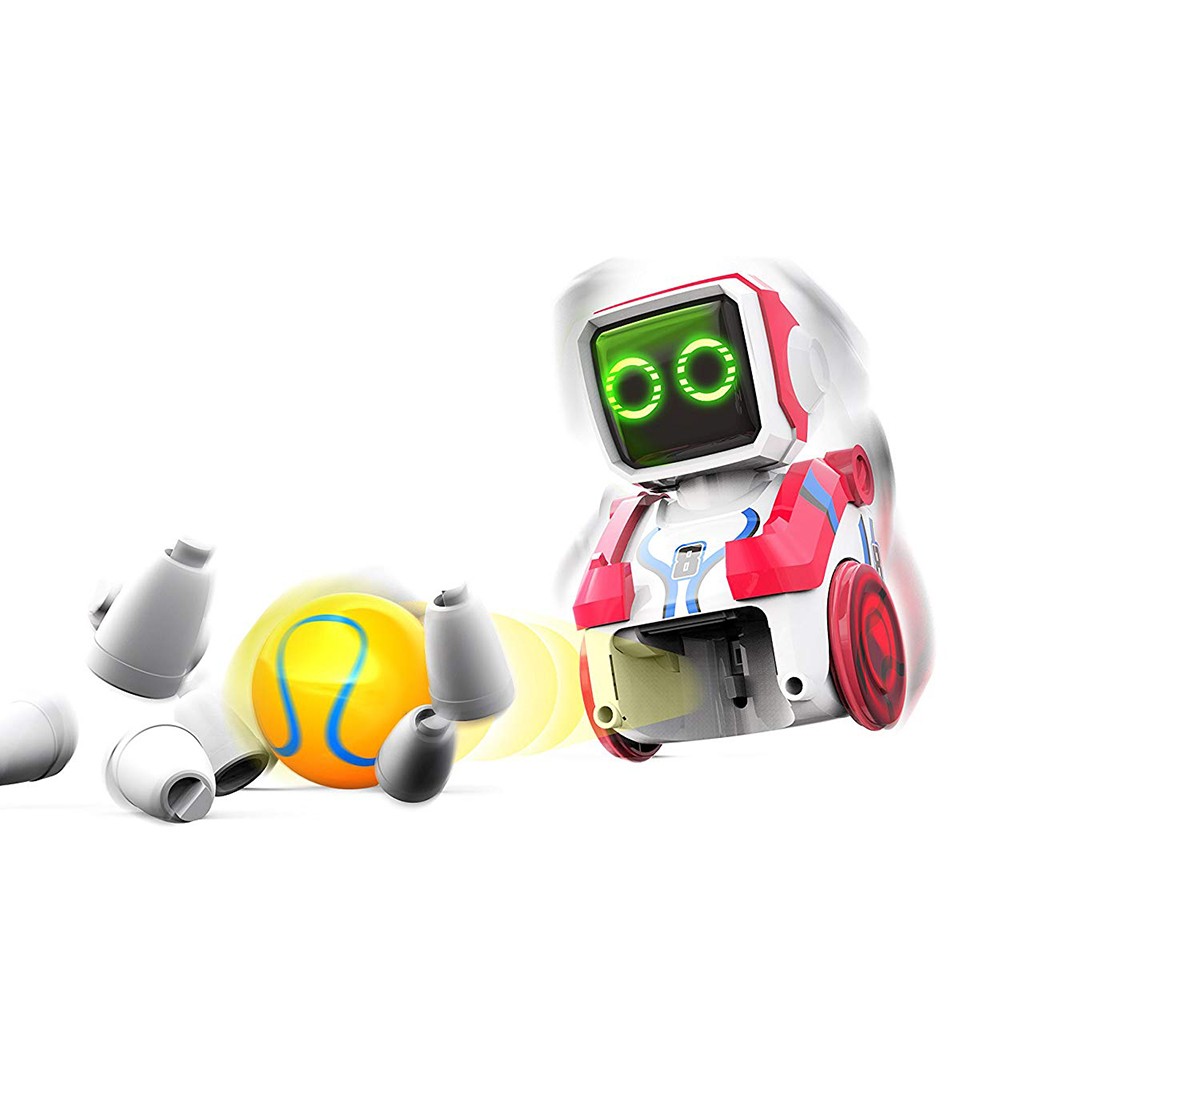 Silverlit Kickabot  3 In 1 Game Edition With Remote Control, Twin Pack Robotics for Kids age 5Y+ 